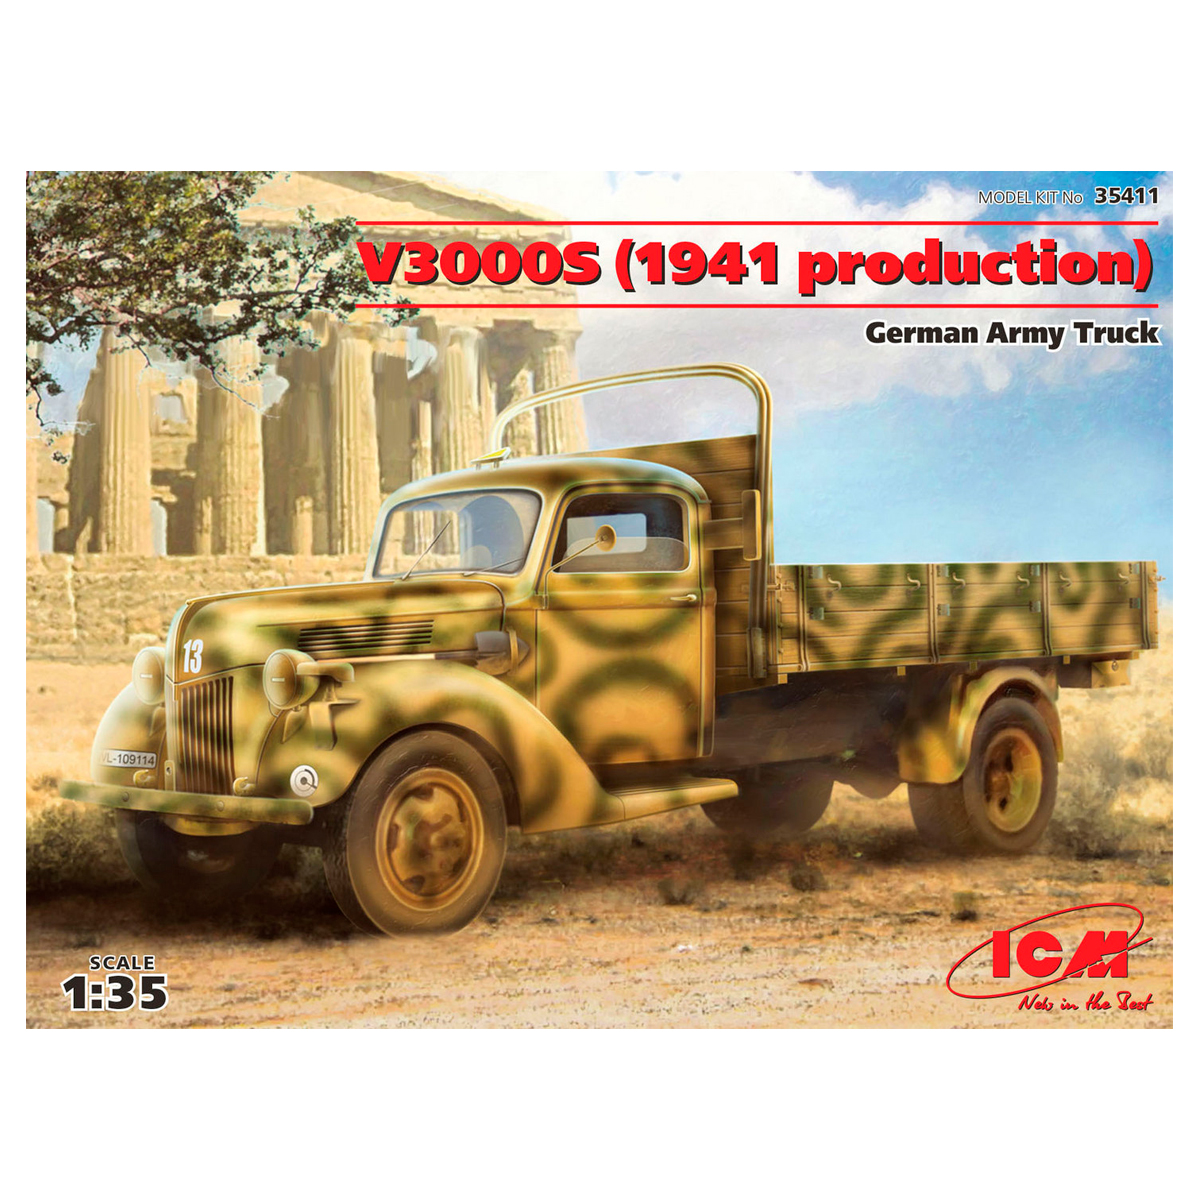 V3000S (1941production), German Army Truck 1/35